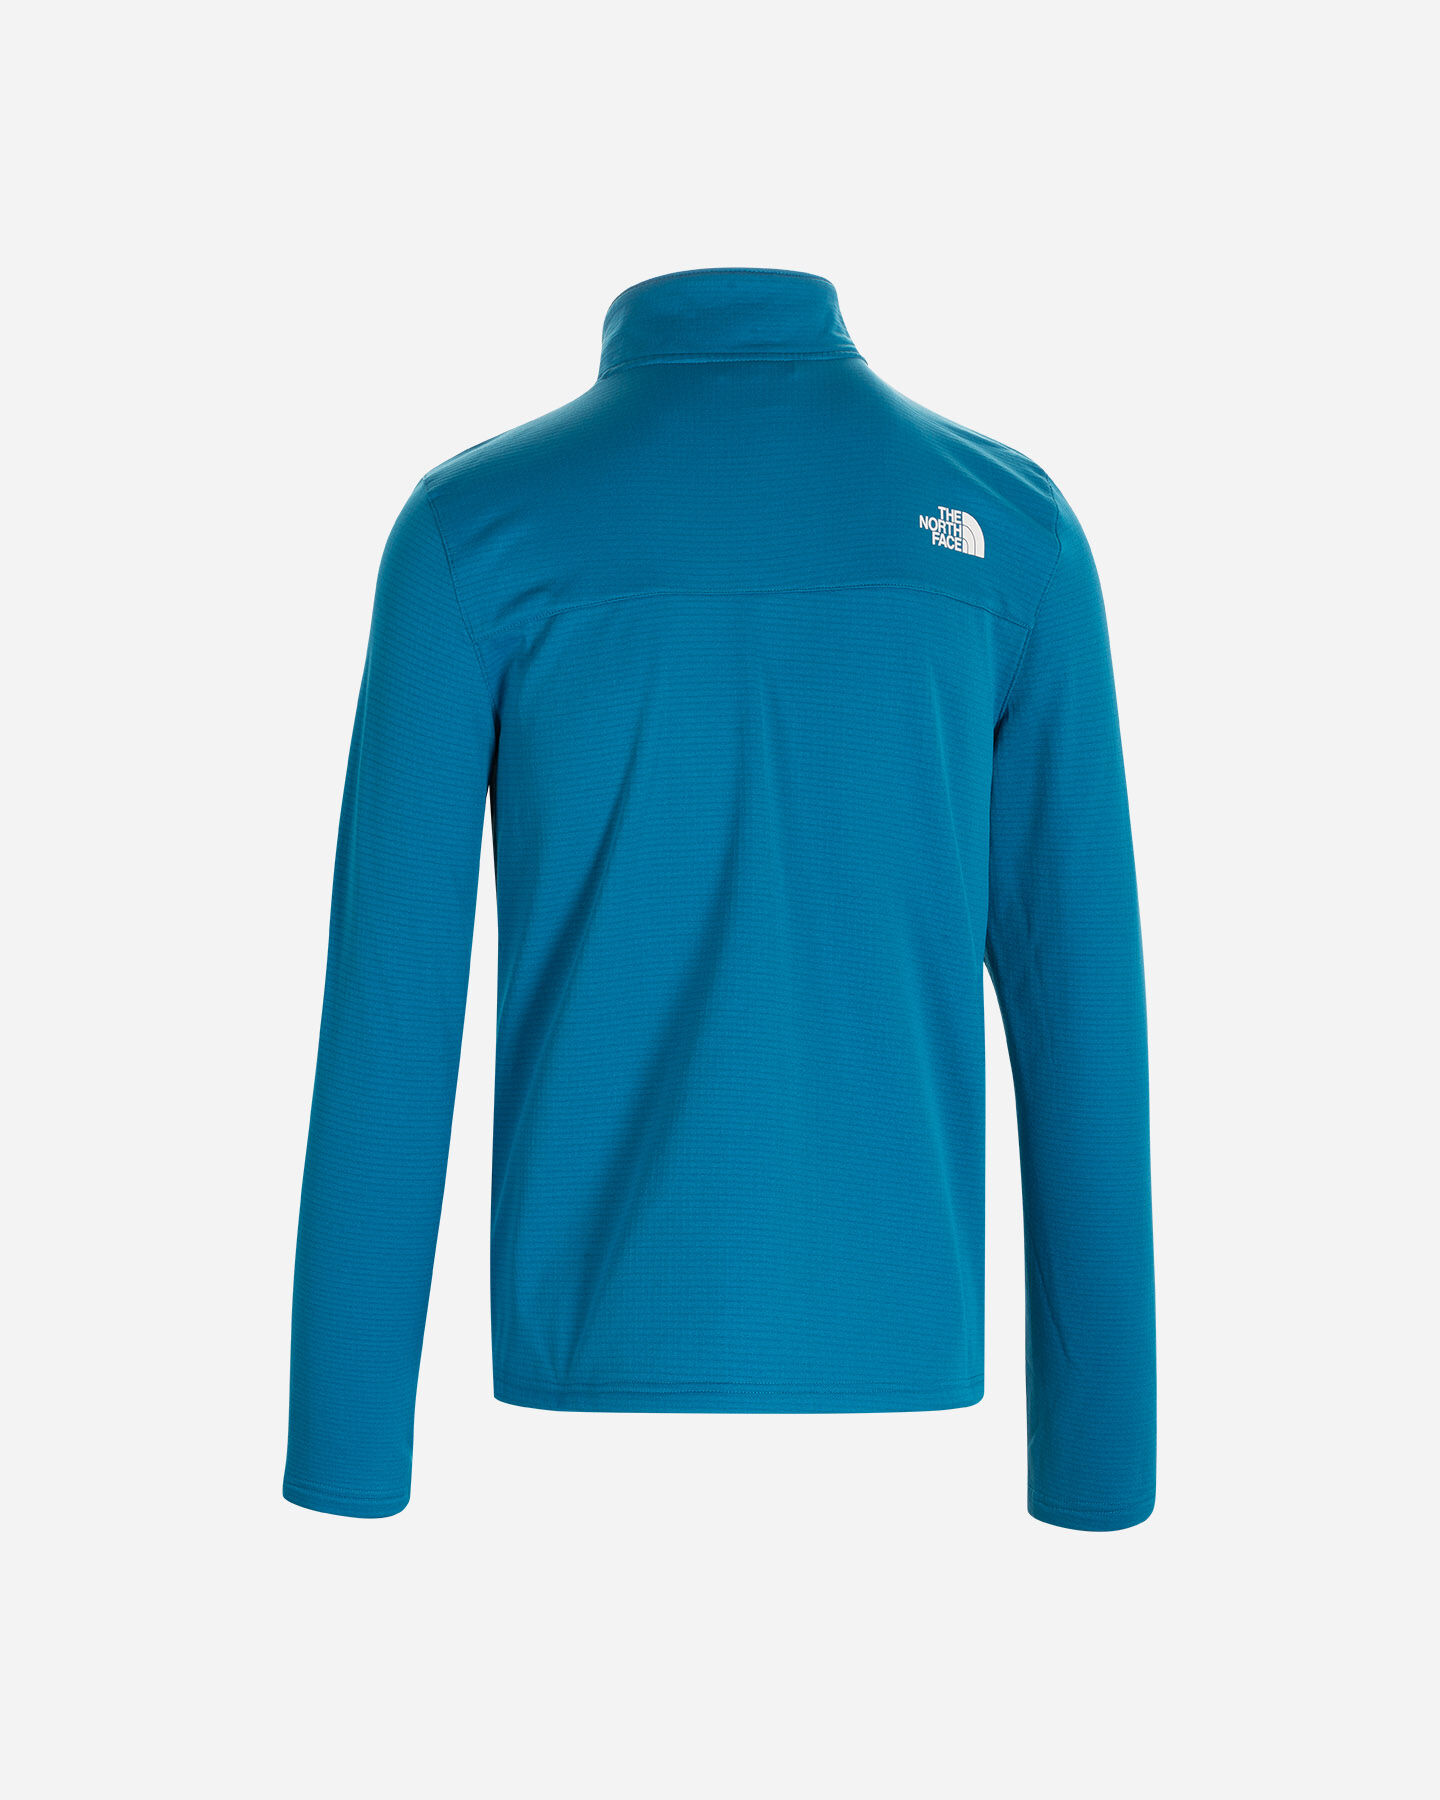  Pile THE NORTH FACE ODLES FLEECE M S5430728|5F0|S scatto 1